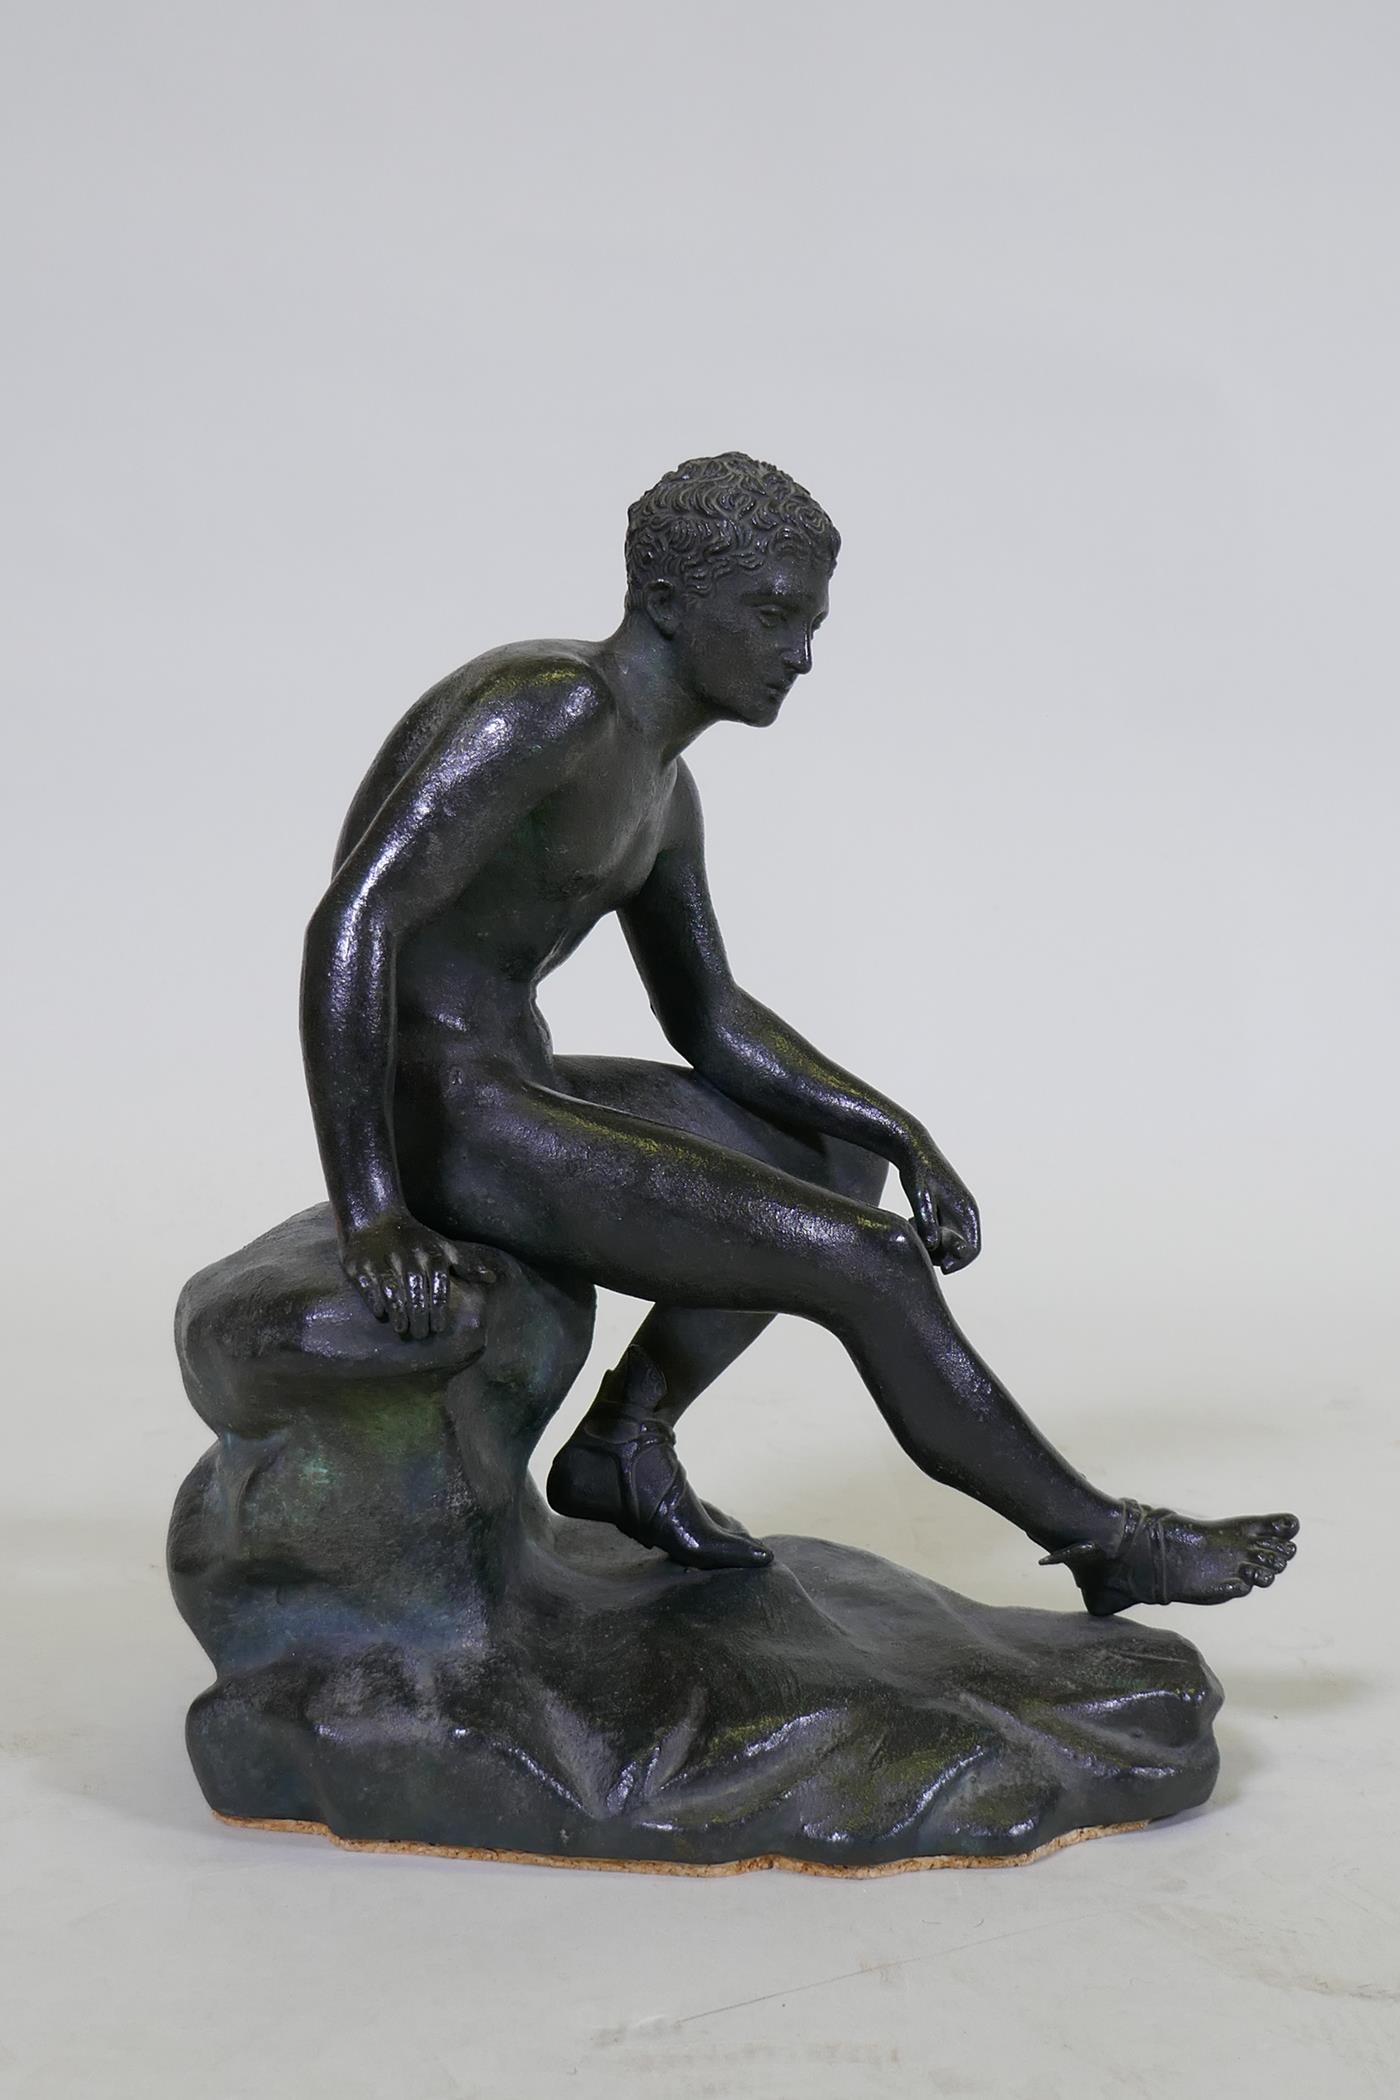 A C19th Grand Tour bronze figure of Hermes/Mercury after the statue found at the Villa of the